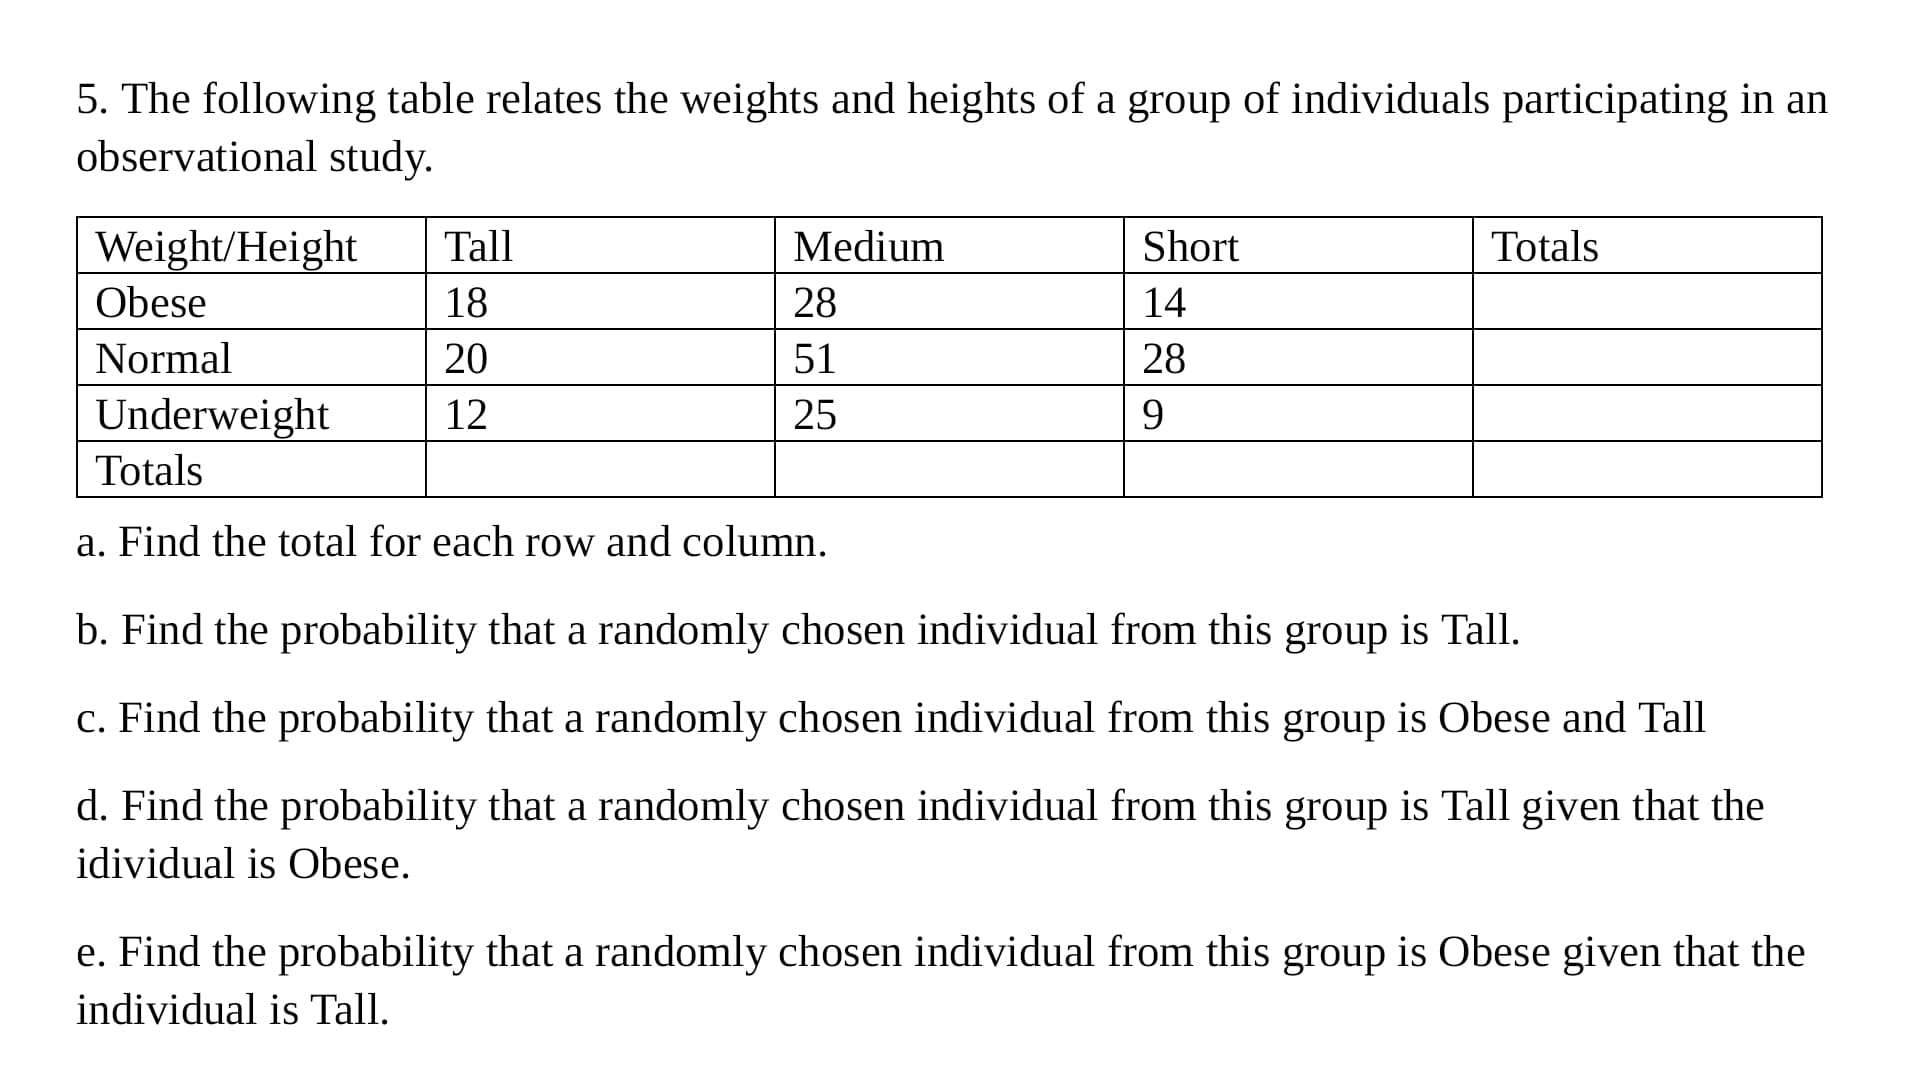 5. The following table relates the weights and heights of a group of individuals participating in an
observational study.
Weight/Height
Obese
Tall
Medium
Short
Totals
18
28
14
Normal
20
51
28
Underweight
12
25
9
Totals
a. Find the total for each row and column.
b. Find the probability that a randomly chosen individual from this group is Tall.
c. Find the probability that a randomly chosen individual from this group is Obese and Tall
d. Find the probability that a randomly chosen individual from this group is Tall given that the
idividual is Obese.
e. Find the probability that a randomly chosen individual from this group is Obese given that the
individual is Tall.
